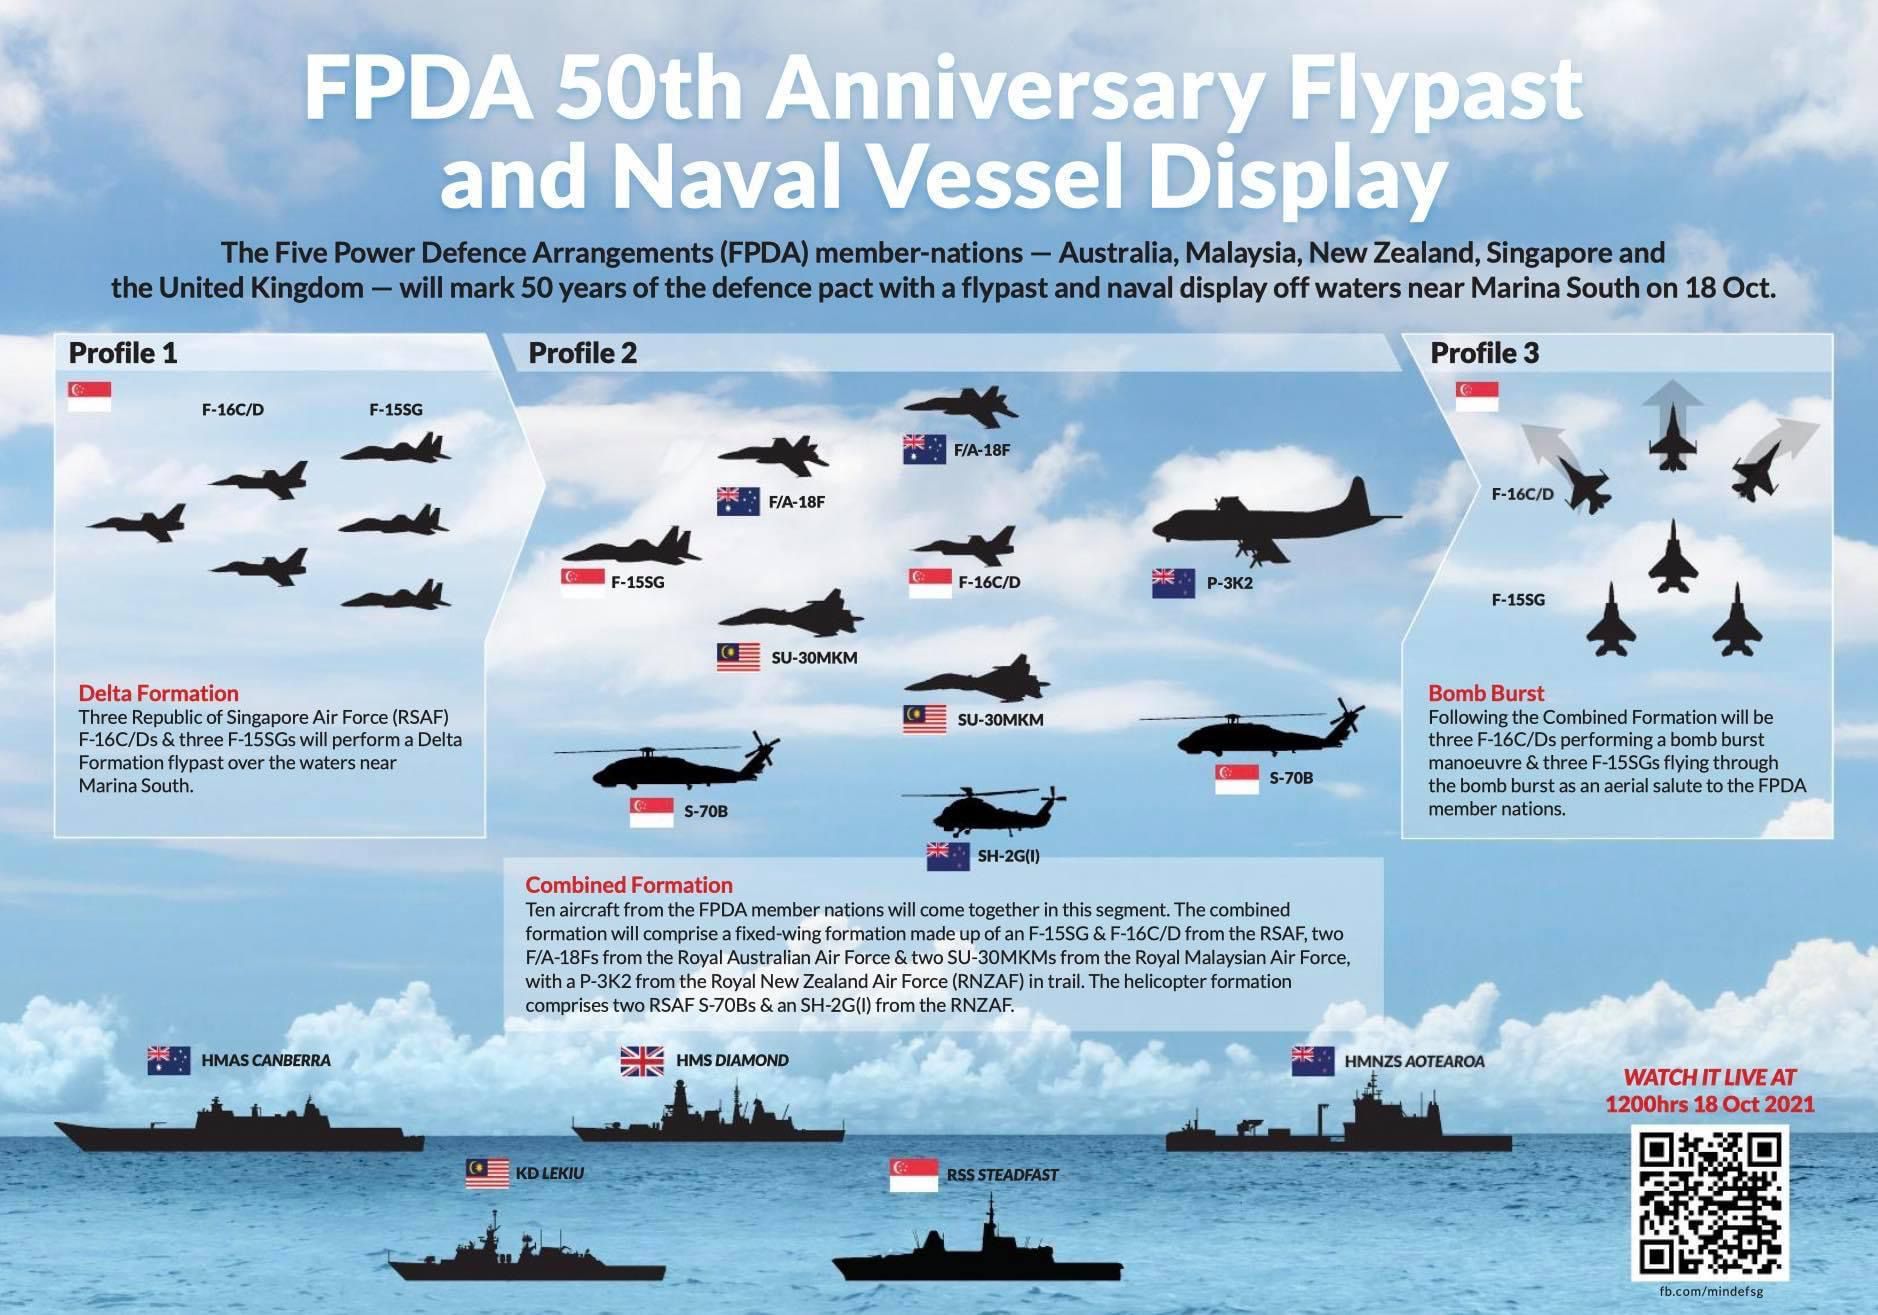 FPDA 50th Anniversary Flypast and naval vessel display